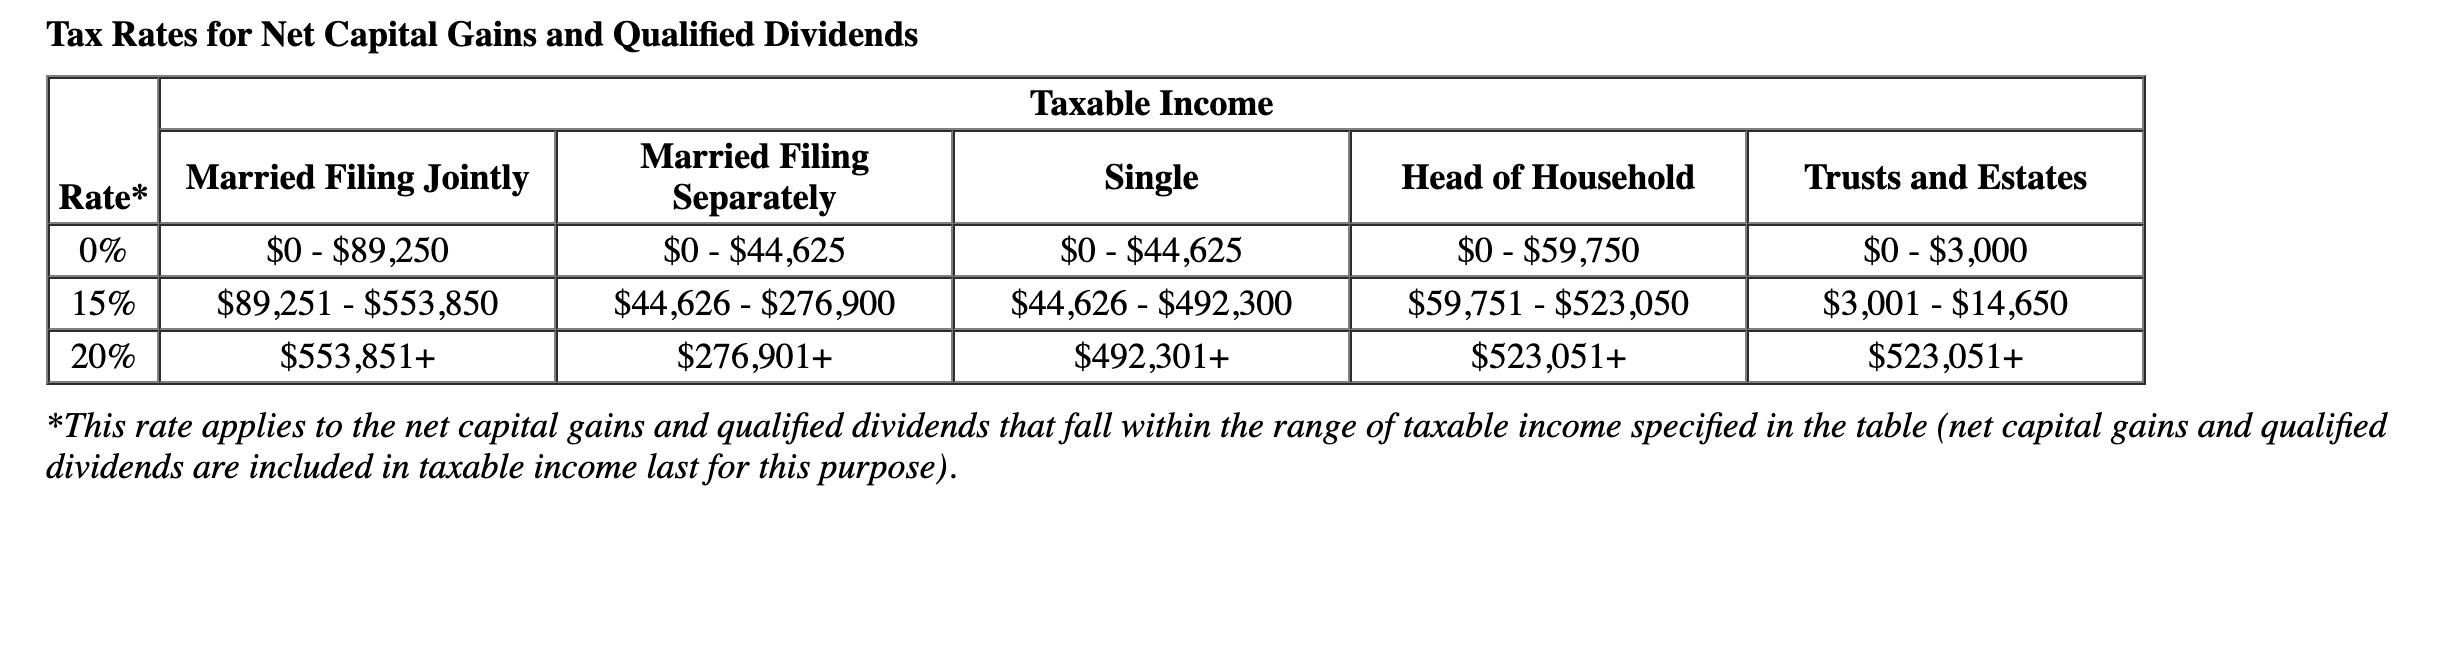 Tax Rates for Net Capital Gains and Qualified Dividends Rate* 0% 15% 20% Married Filing Jointly $0-$89,250